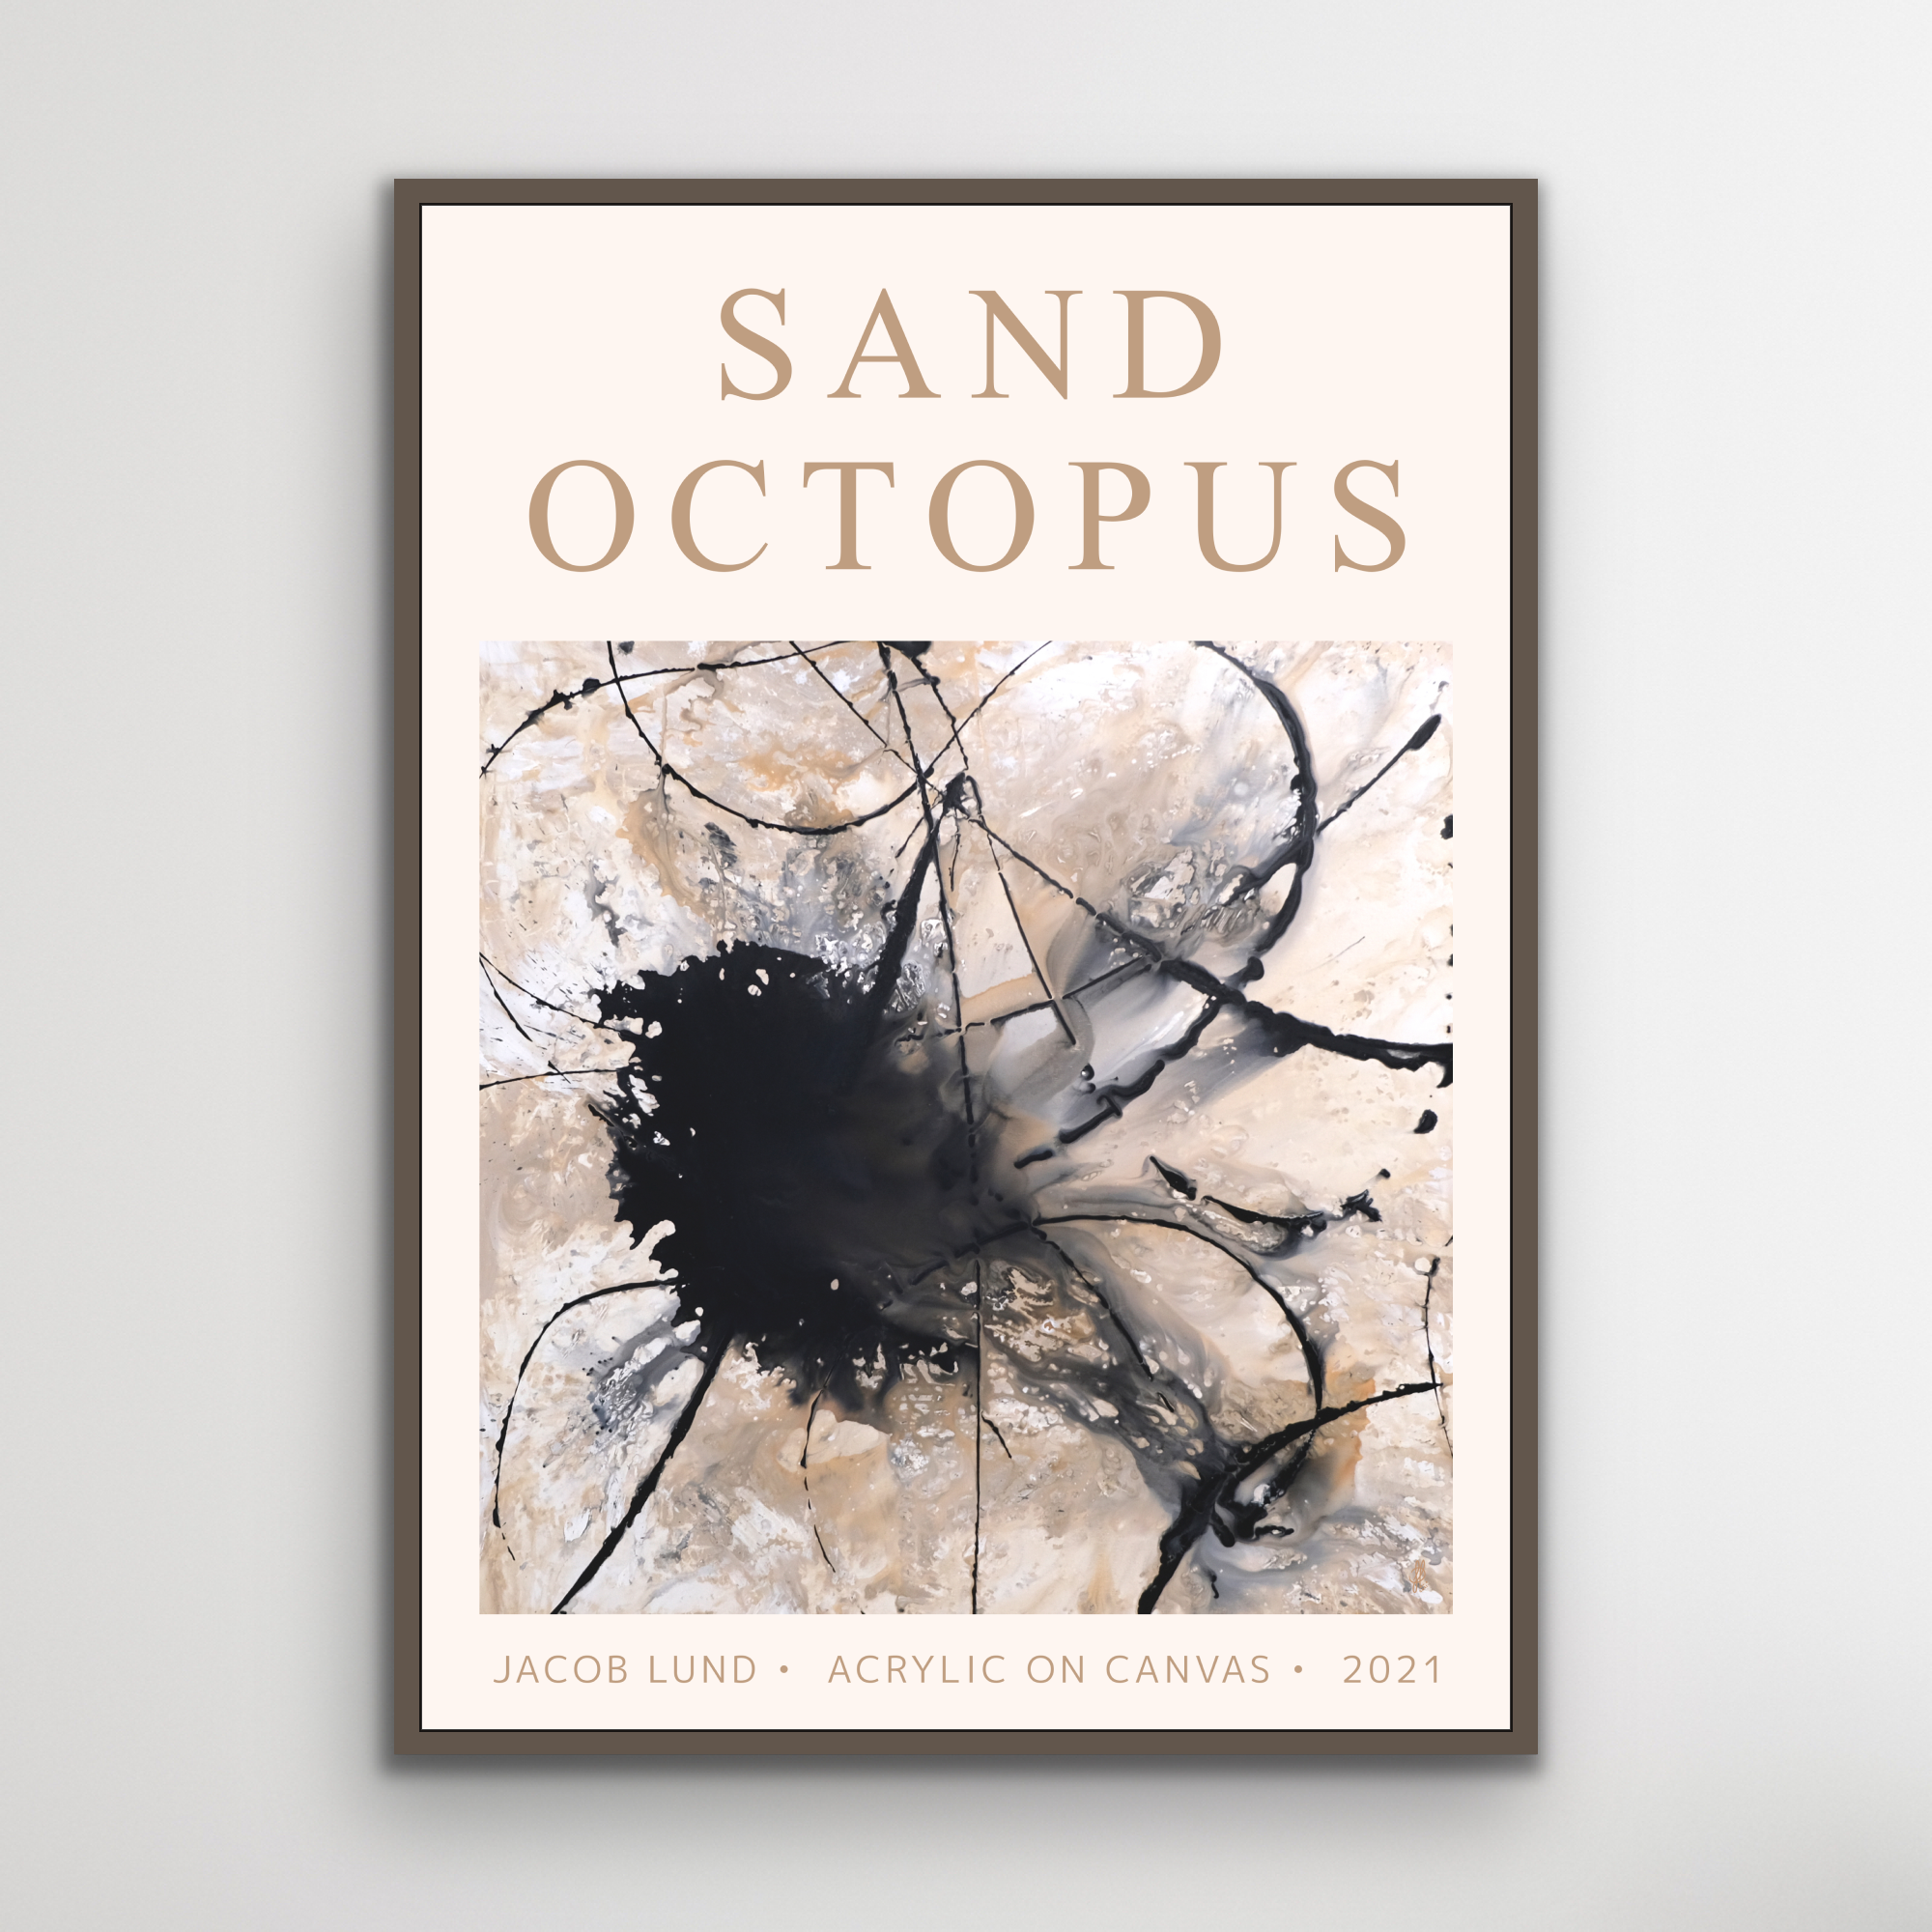 Poster: "Sand Octopus"